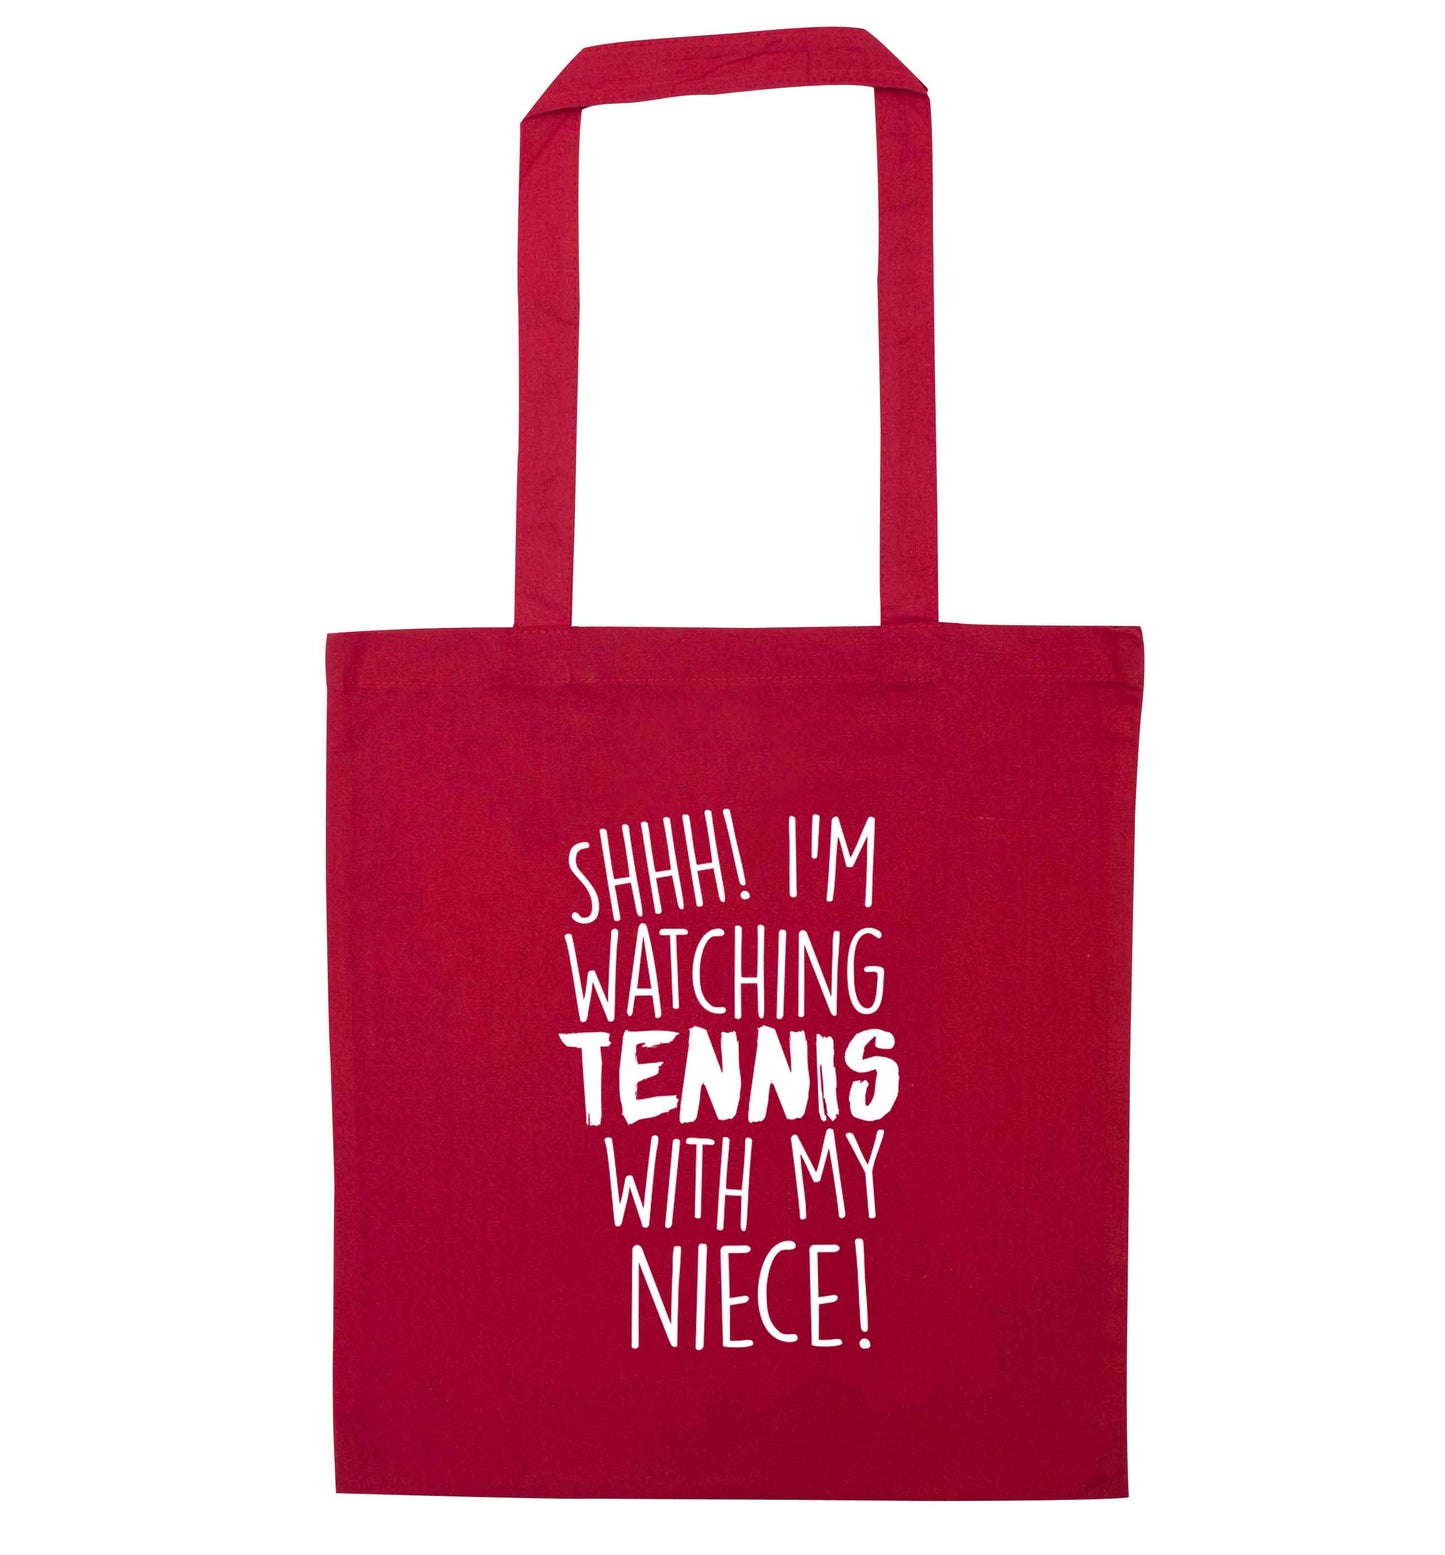 Shh! I'm watching tennis with my niece! red tote bag